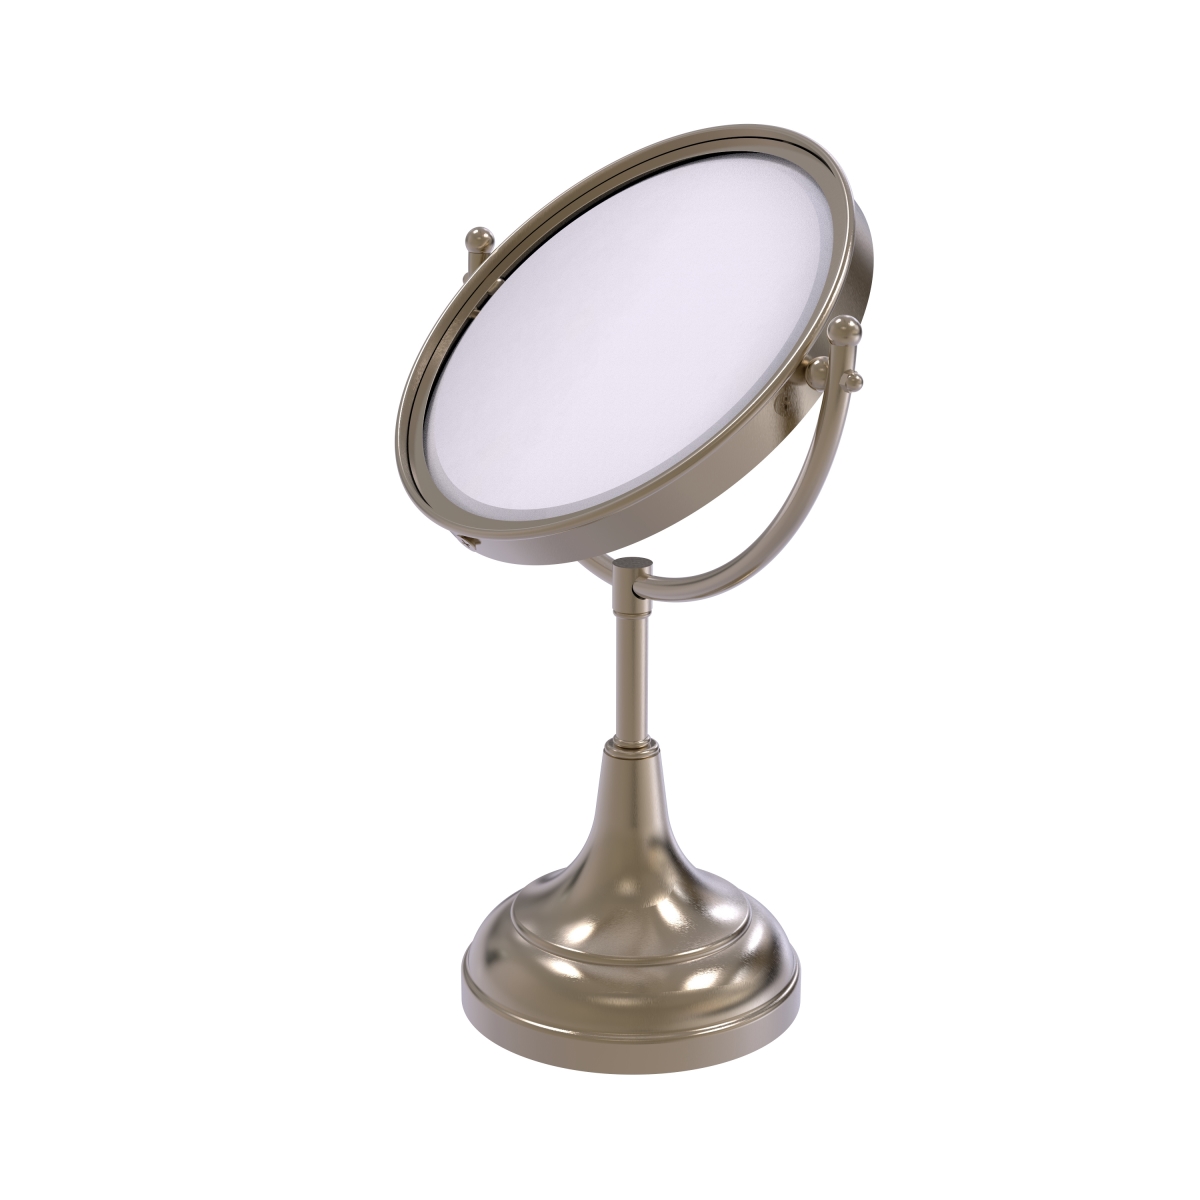 Picture of Allied Brass DM-2-2X-PEW 8 in. Vanity Top Make-Up Mirror 2X Magnification, Antique Pewter - 15 x 8 x 8 in.